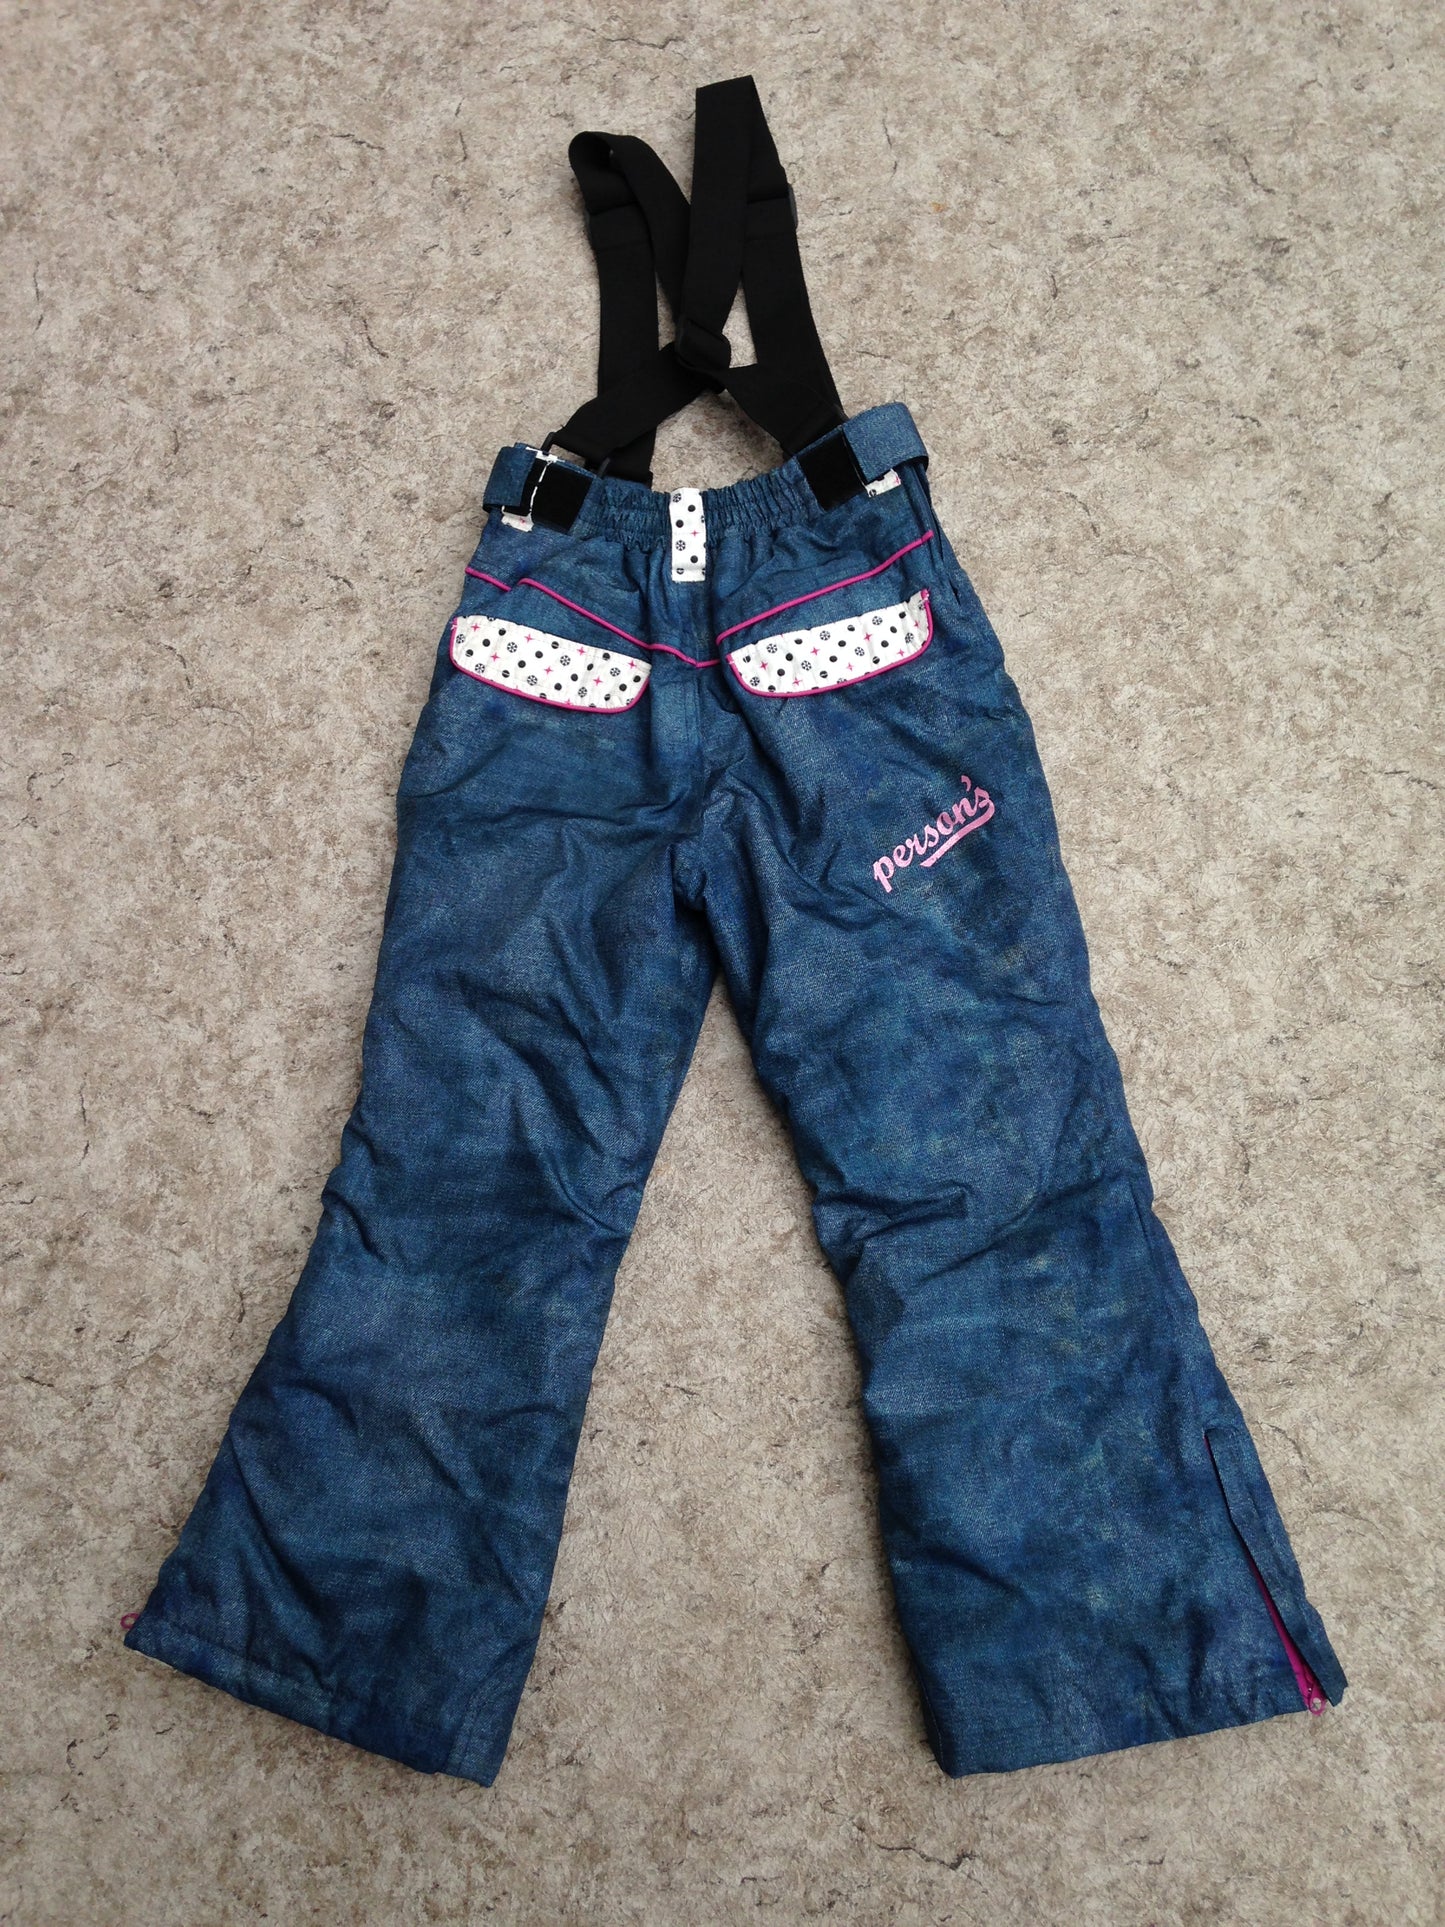 Snow Pants Child Size 8-10 Europe Pearson Fun Denim Look Removeable Straps Snowboarding New Demo Model